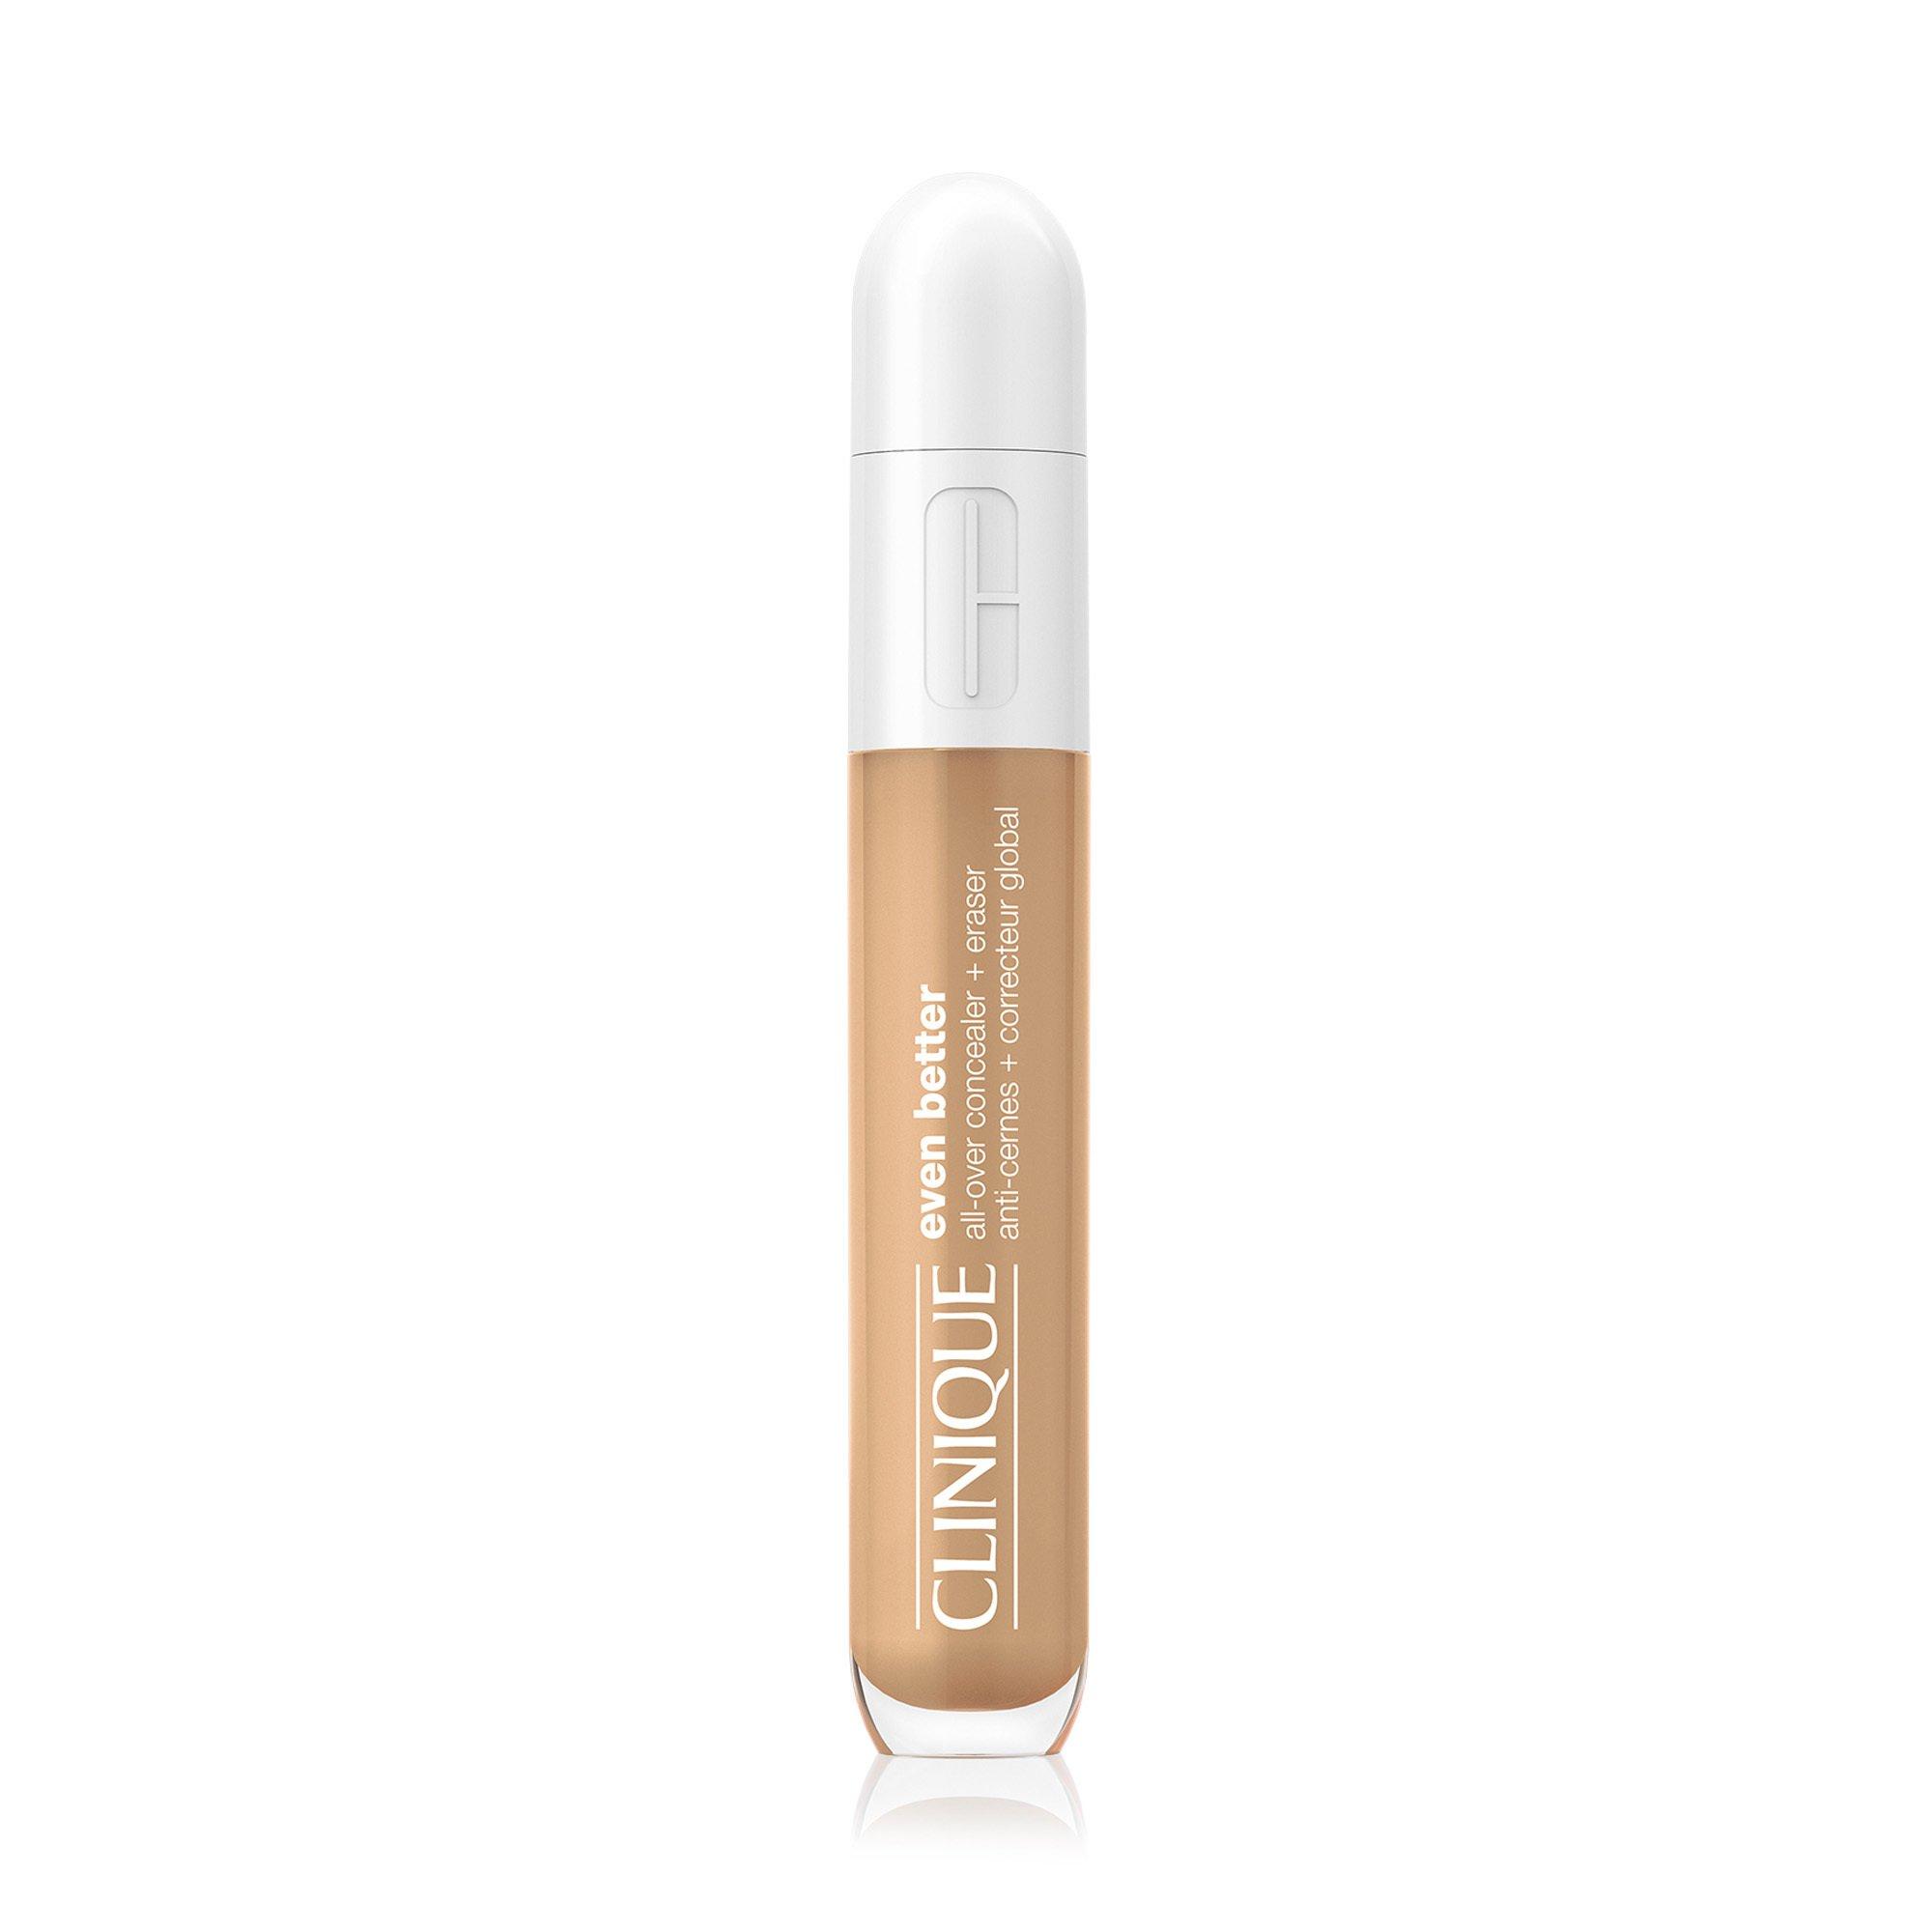 Image of CLINIQUE Even Better Makeup SPF 15 - 30ml